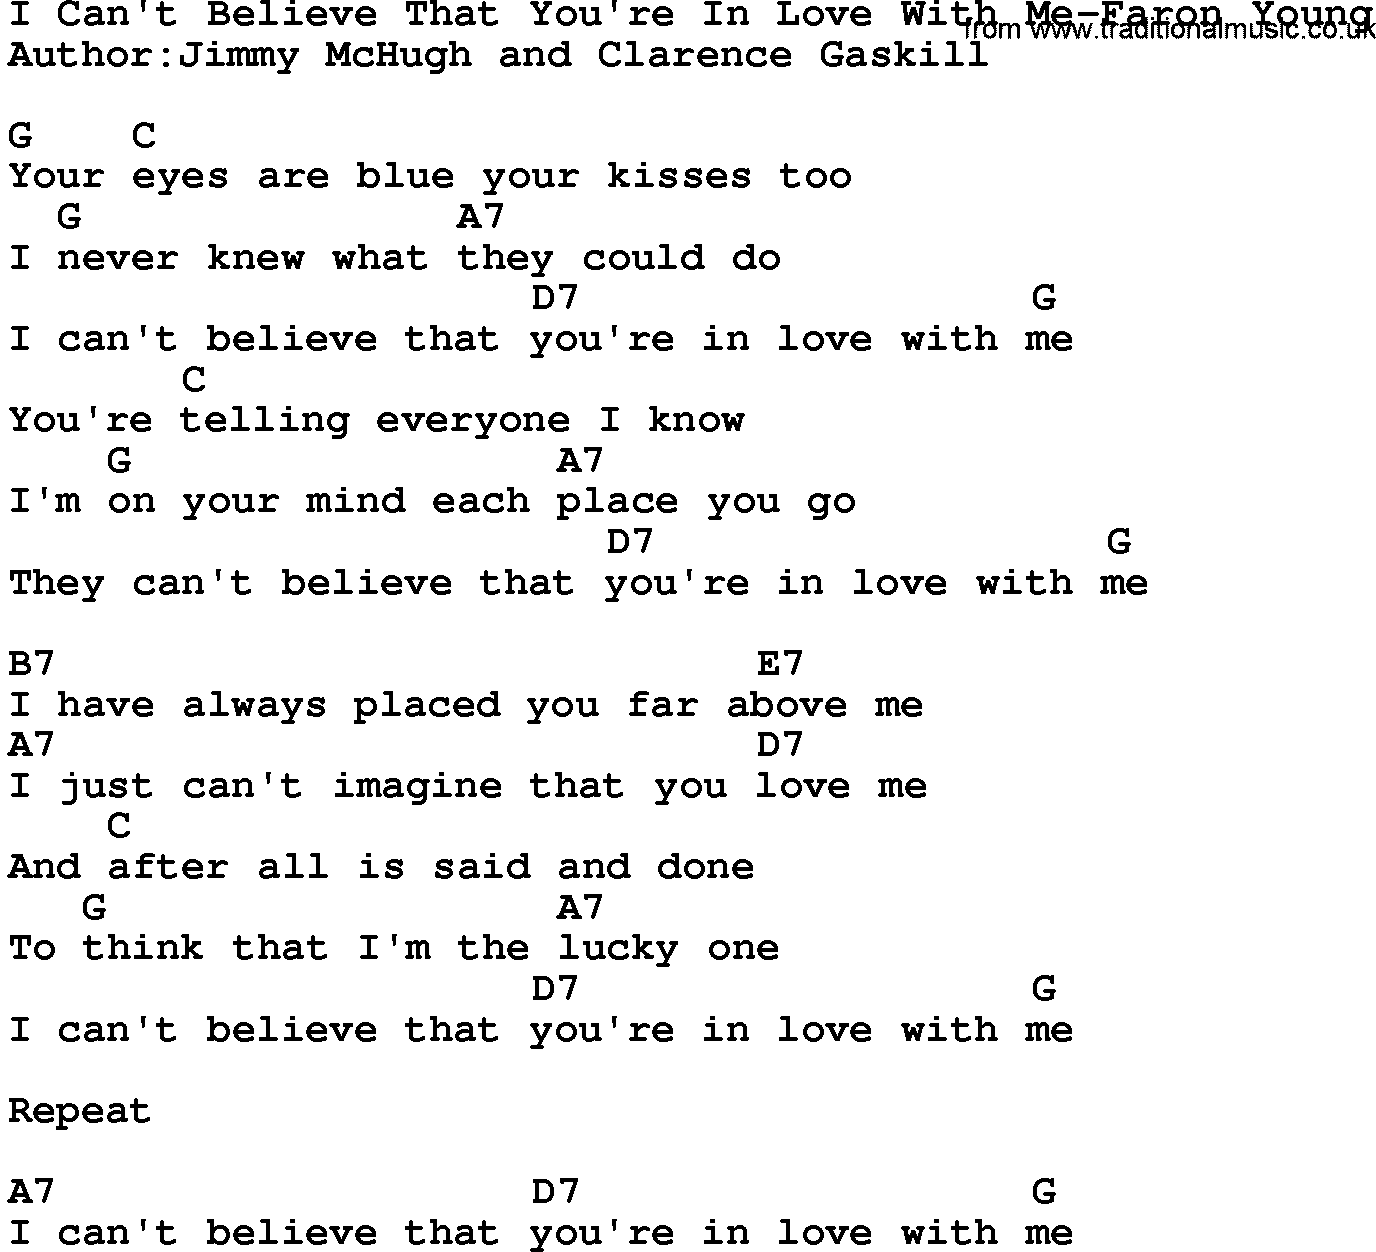 Country music song: I Can't Believe That You're In Love With Me-Faron Young lyrics and chords